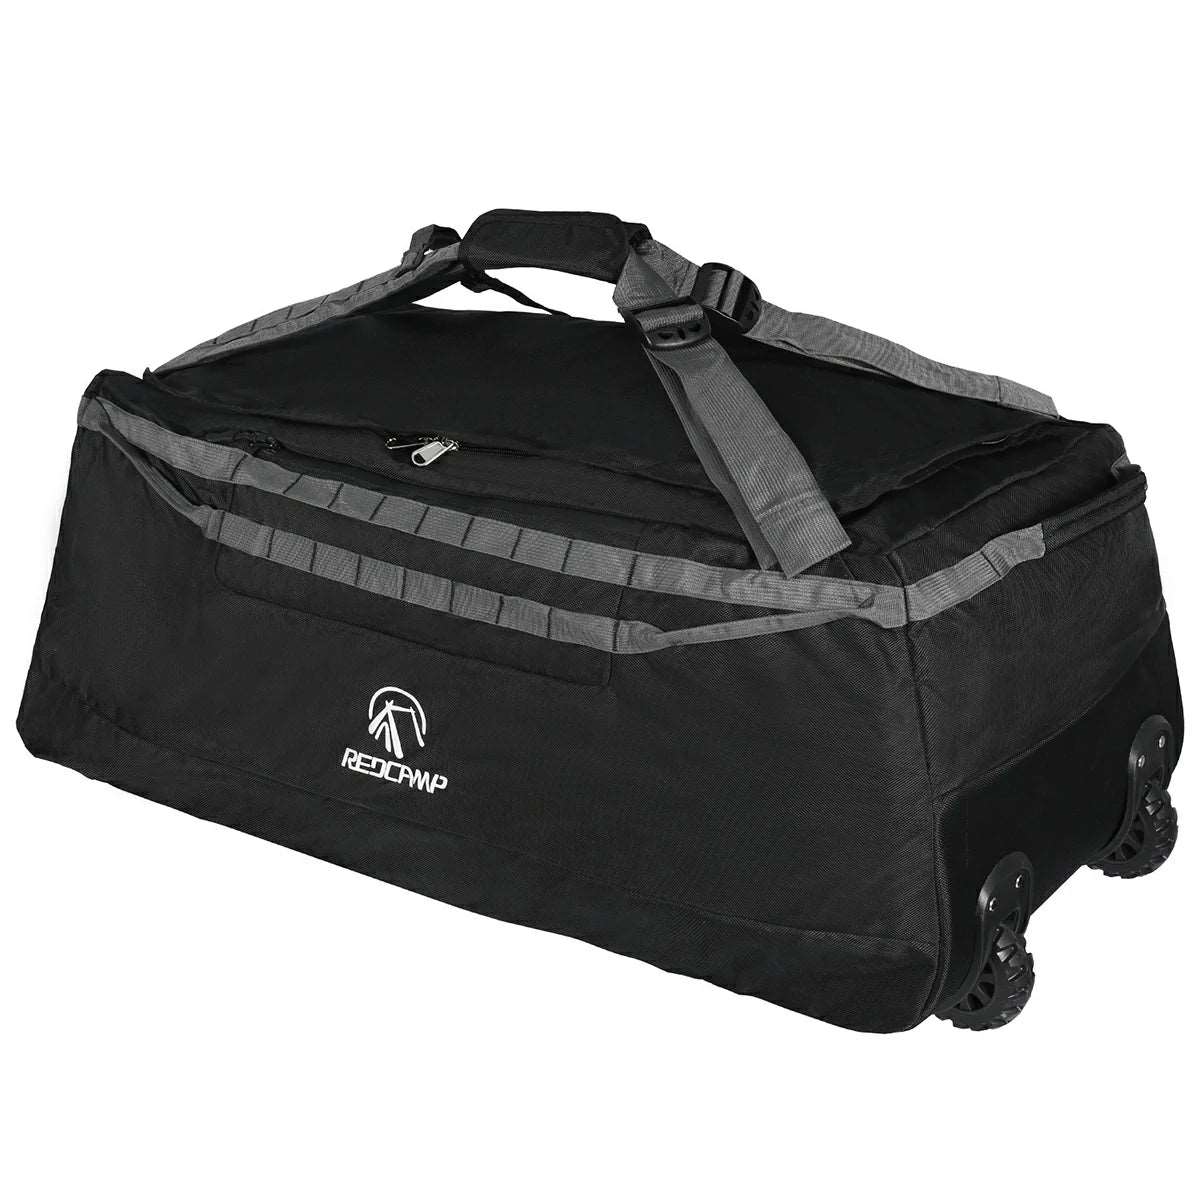 Foldable Duffle Bag with Wheels and Backpack Straps 100/120/140L